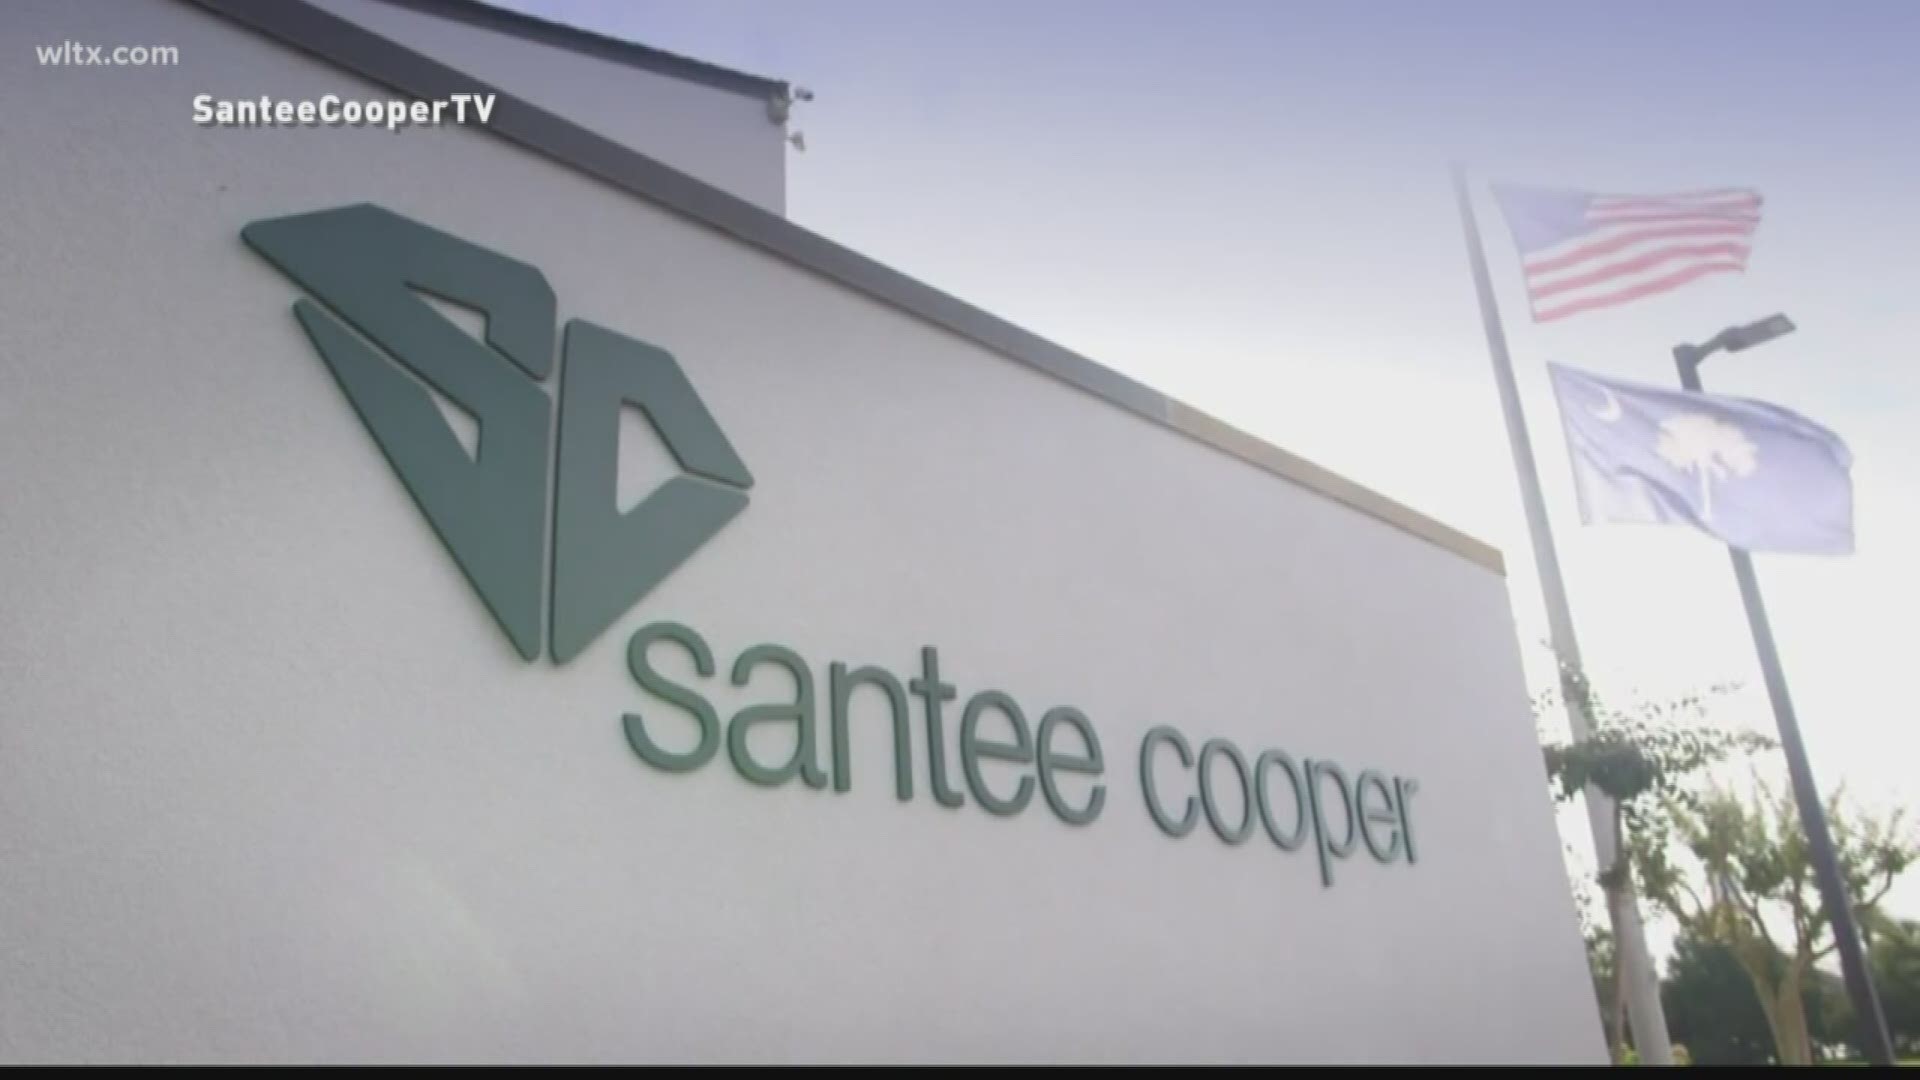 Both the House and Senate want to fire the current Santee Cooper board that they blame for approving a minority stake in two nuclear reactors that were halted.